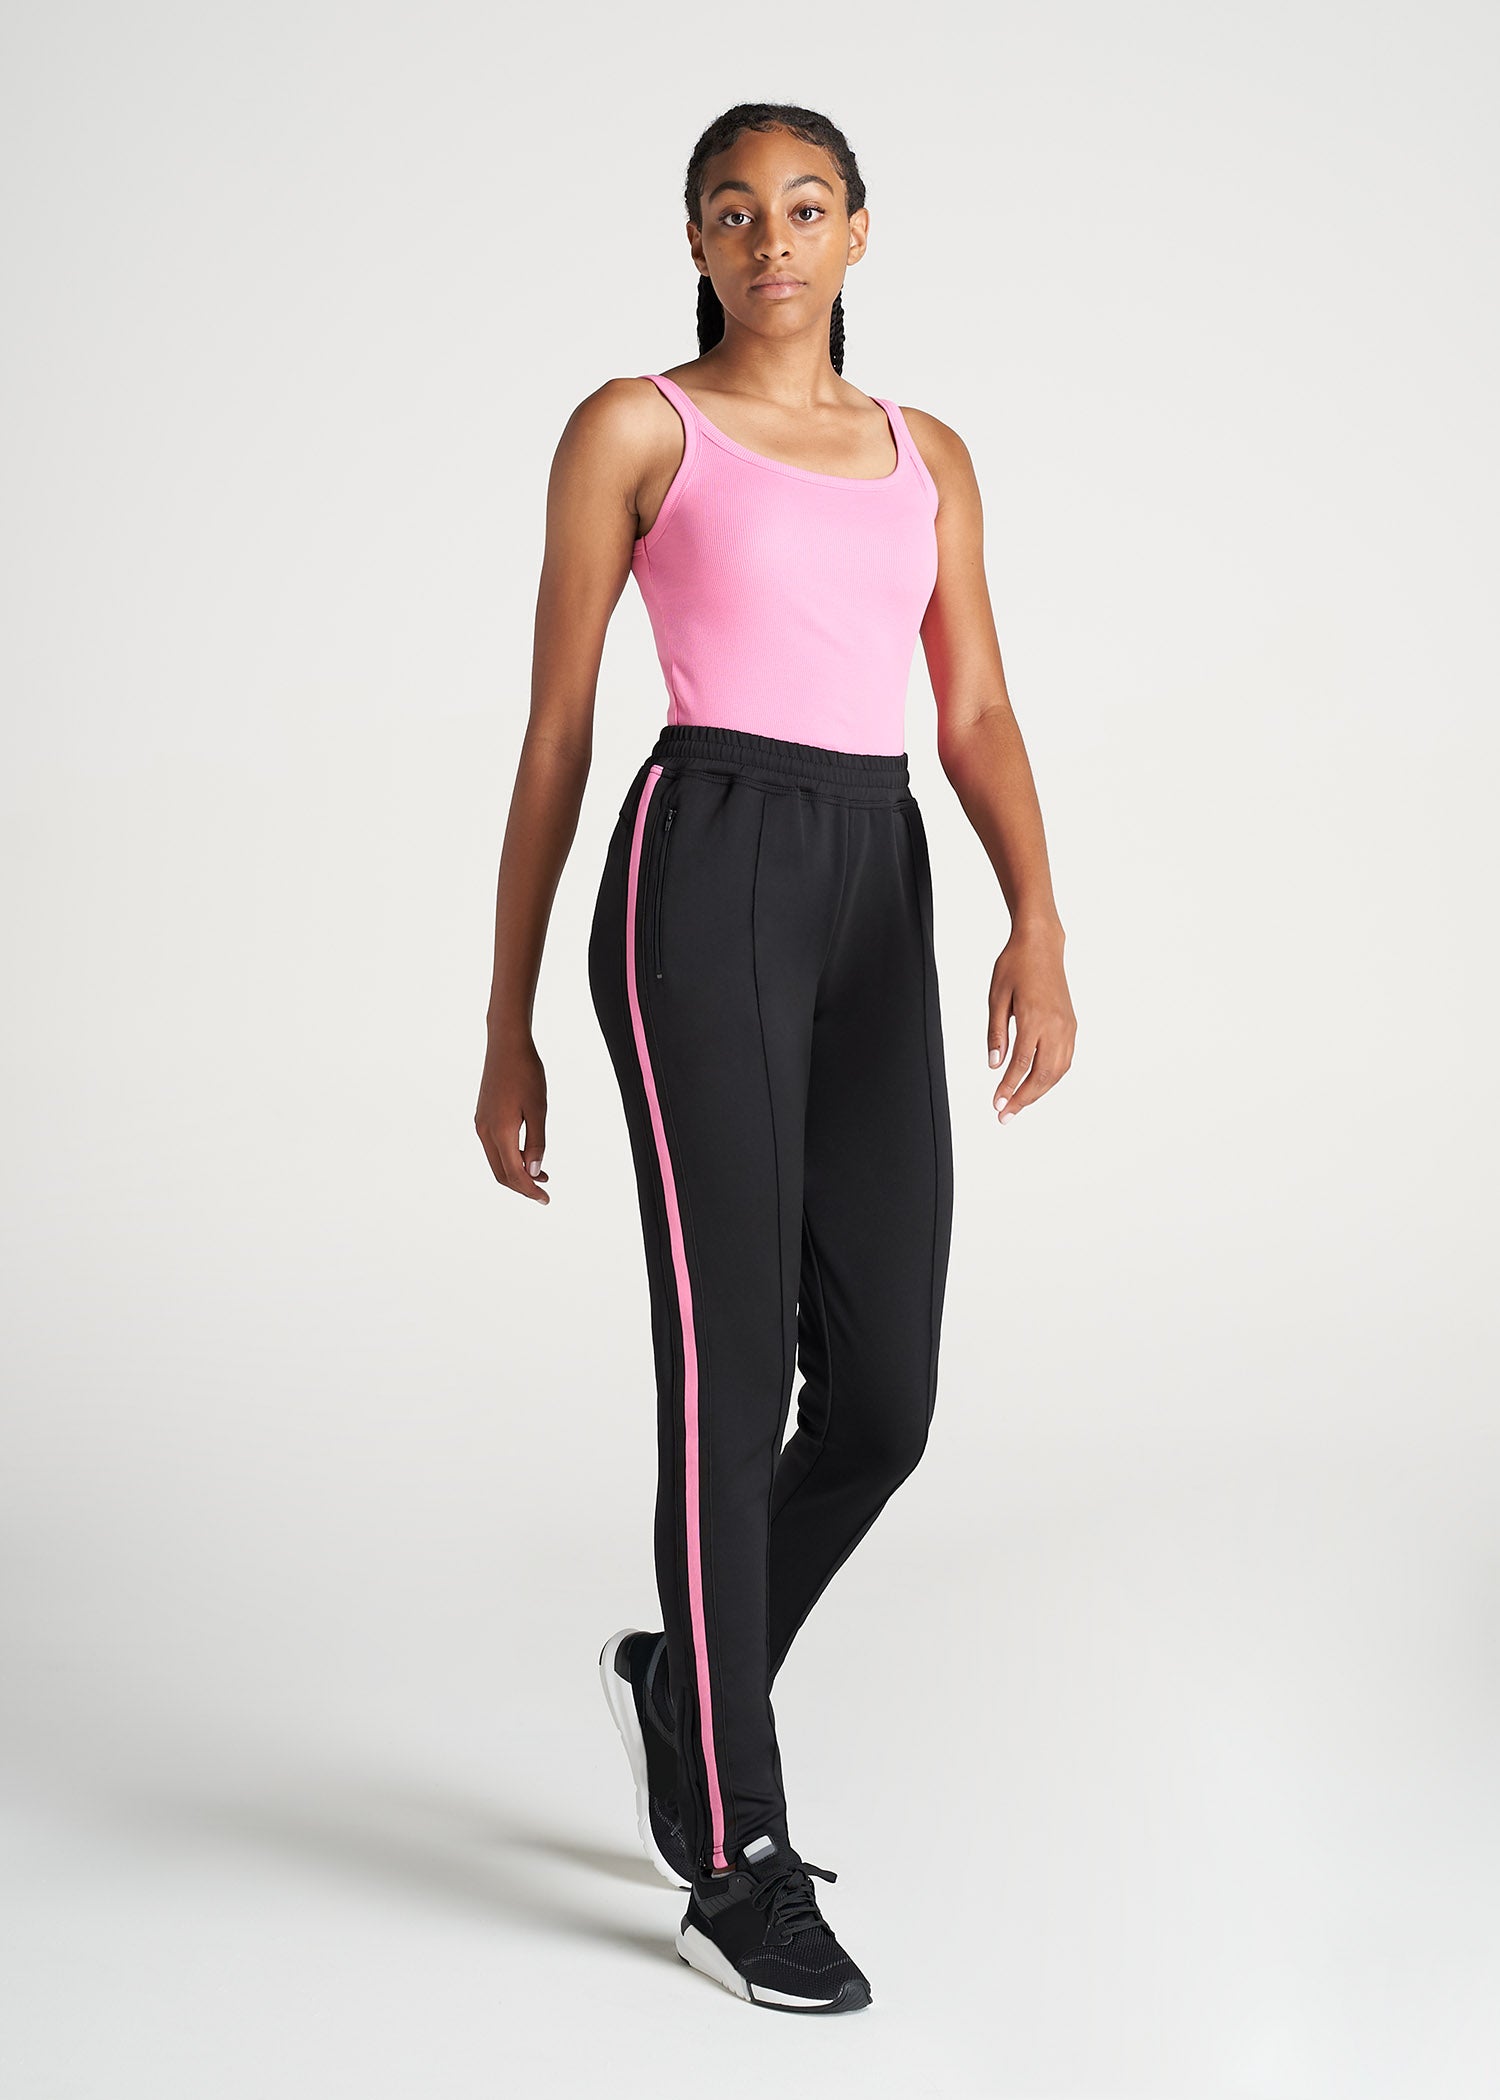 Athletic Wear for Women: Tall Black Pink Stripe Athletic Pant – American  Tall